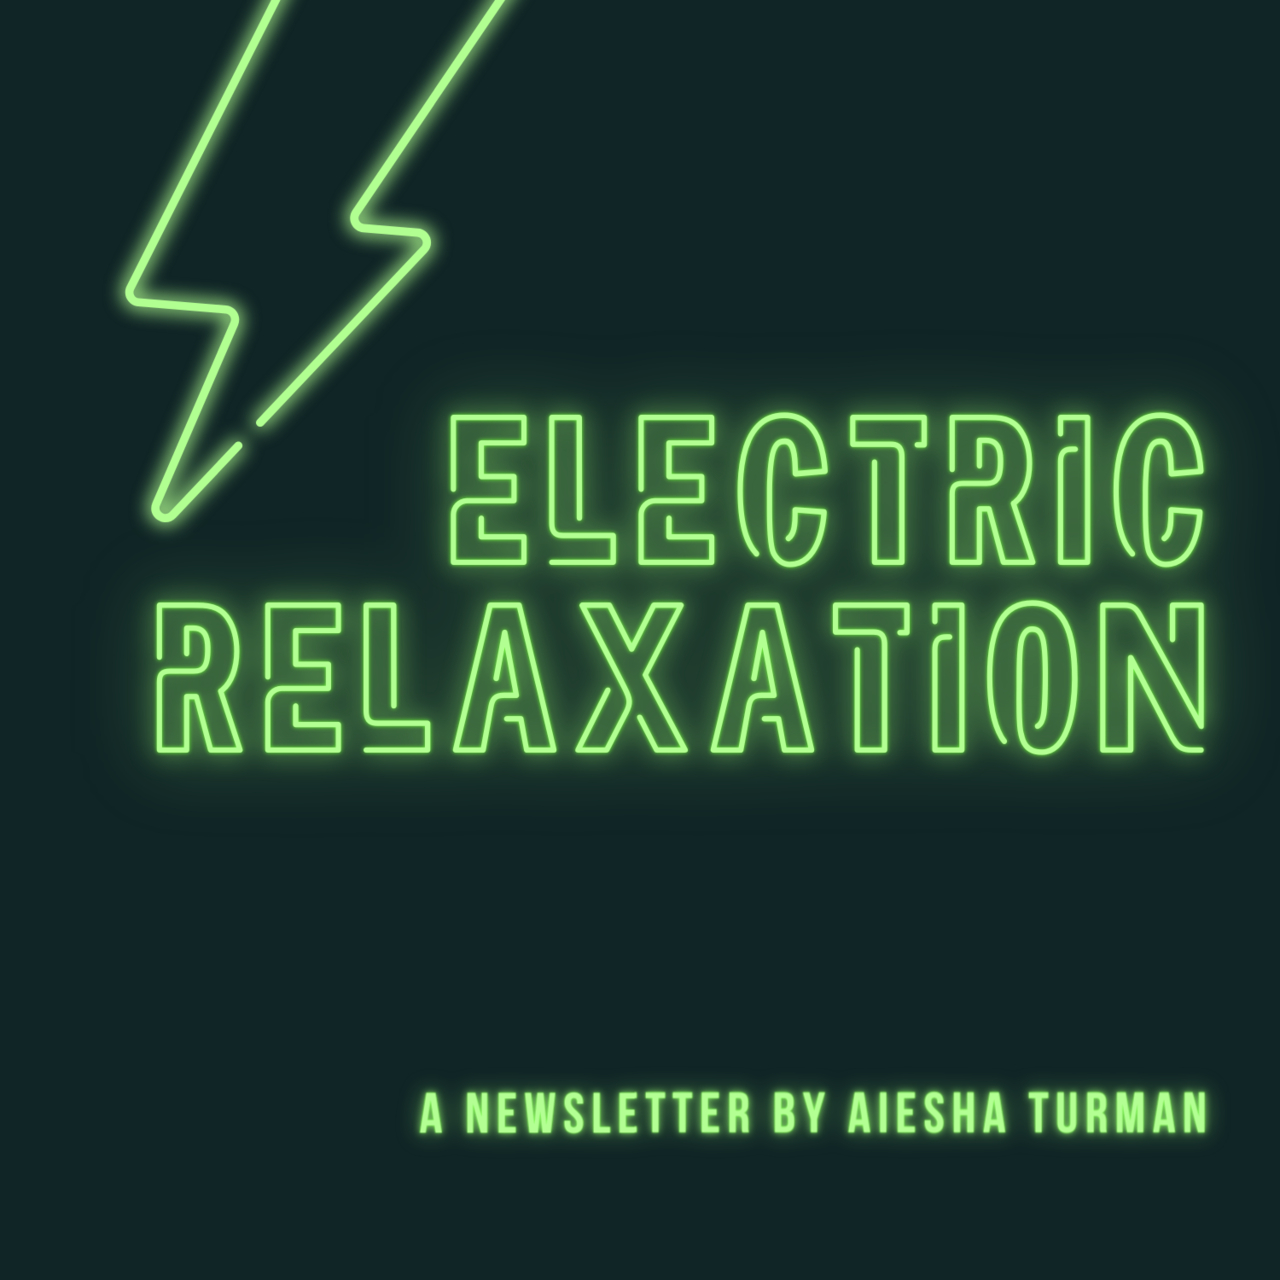 Electric Relaxation: The Newsletter of Dr. Aiesha Turman